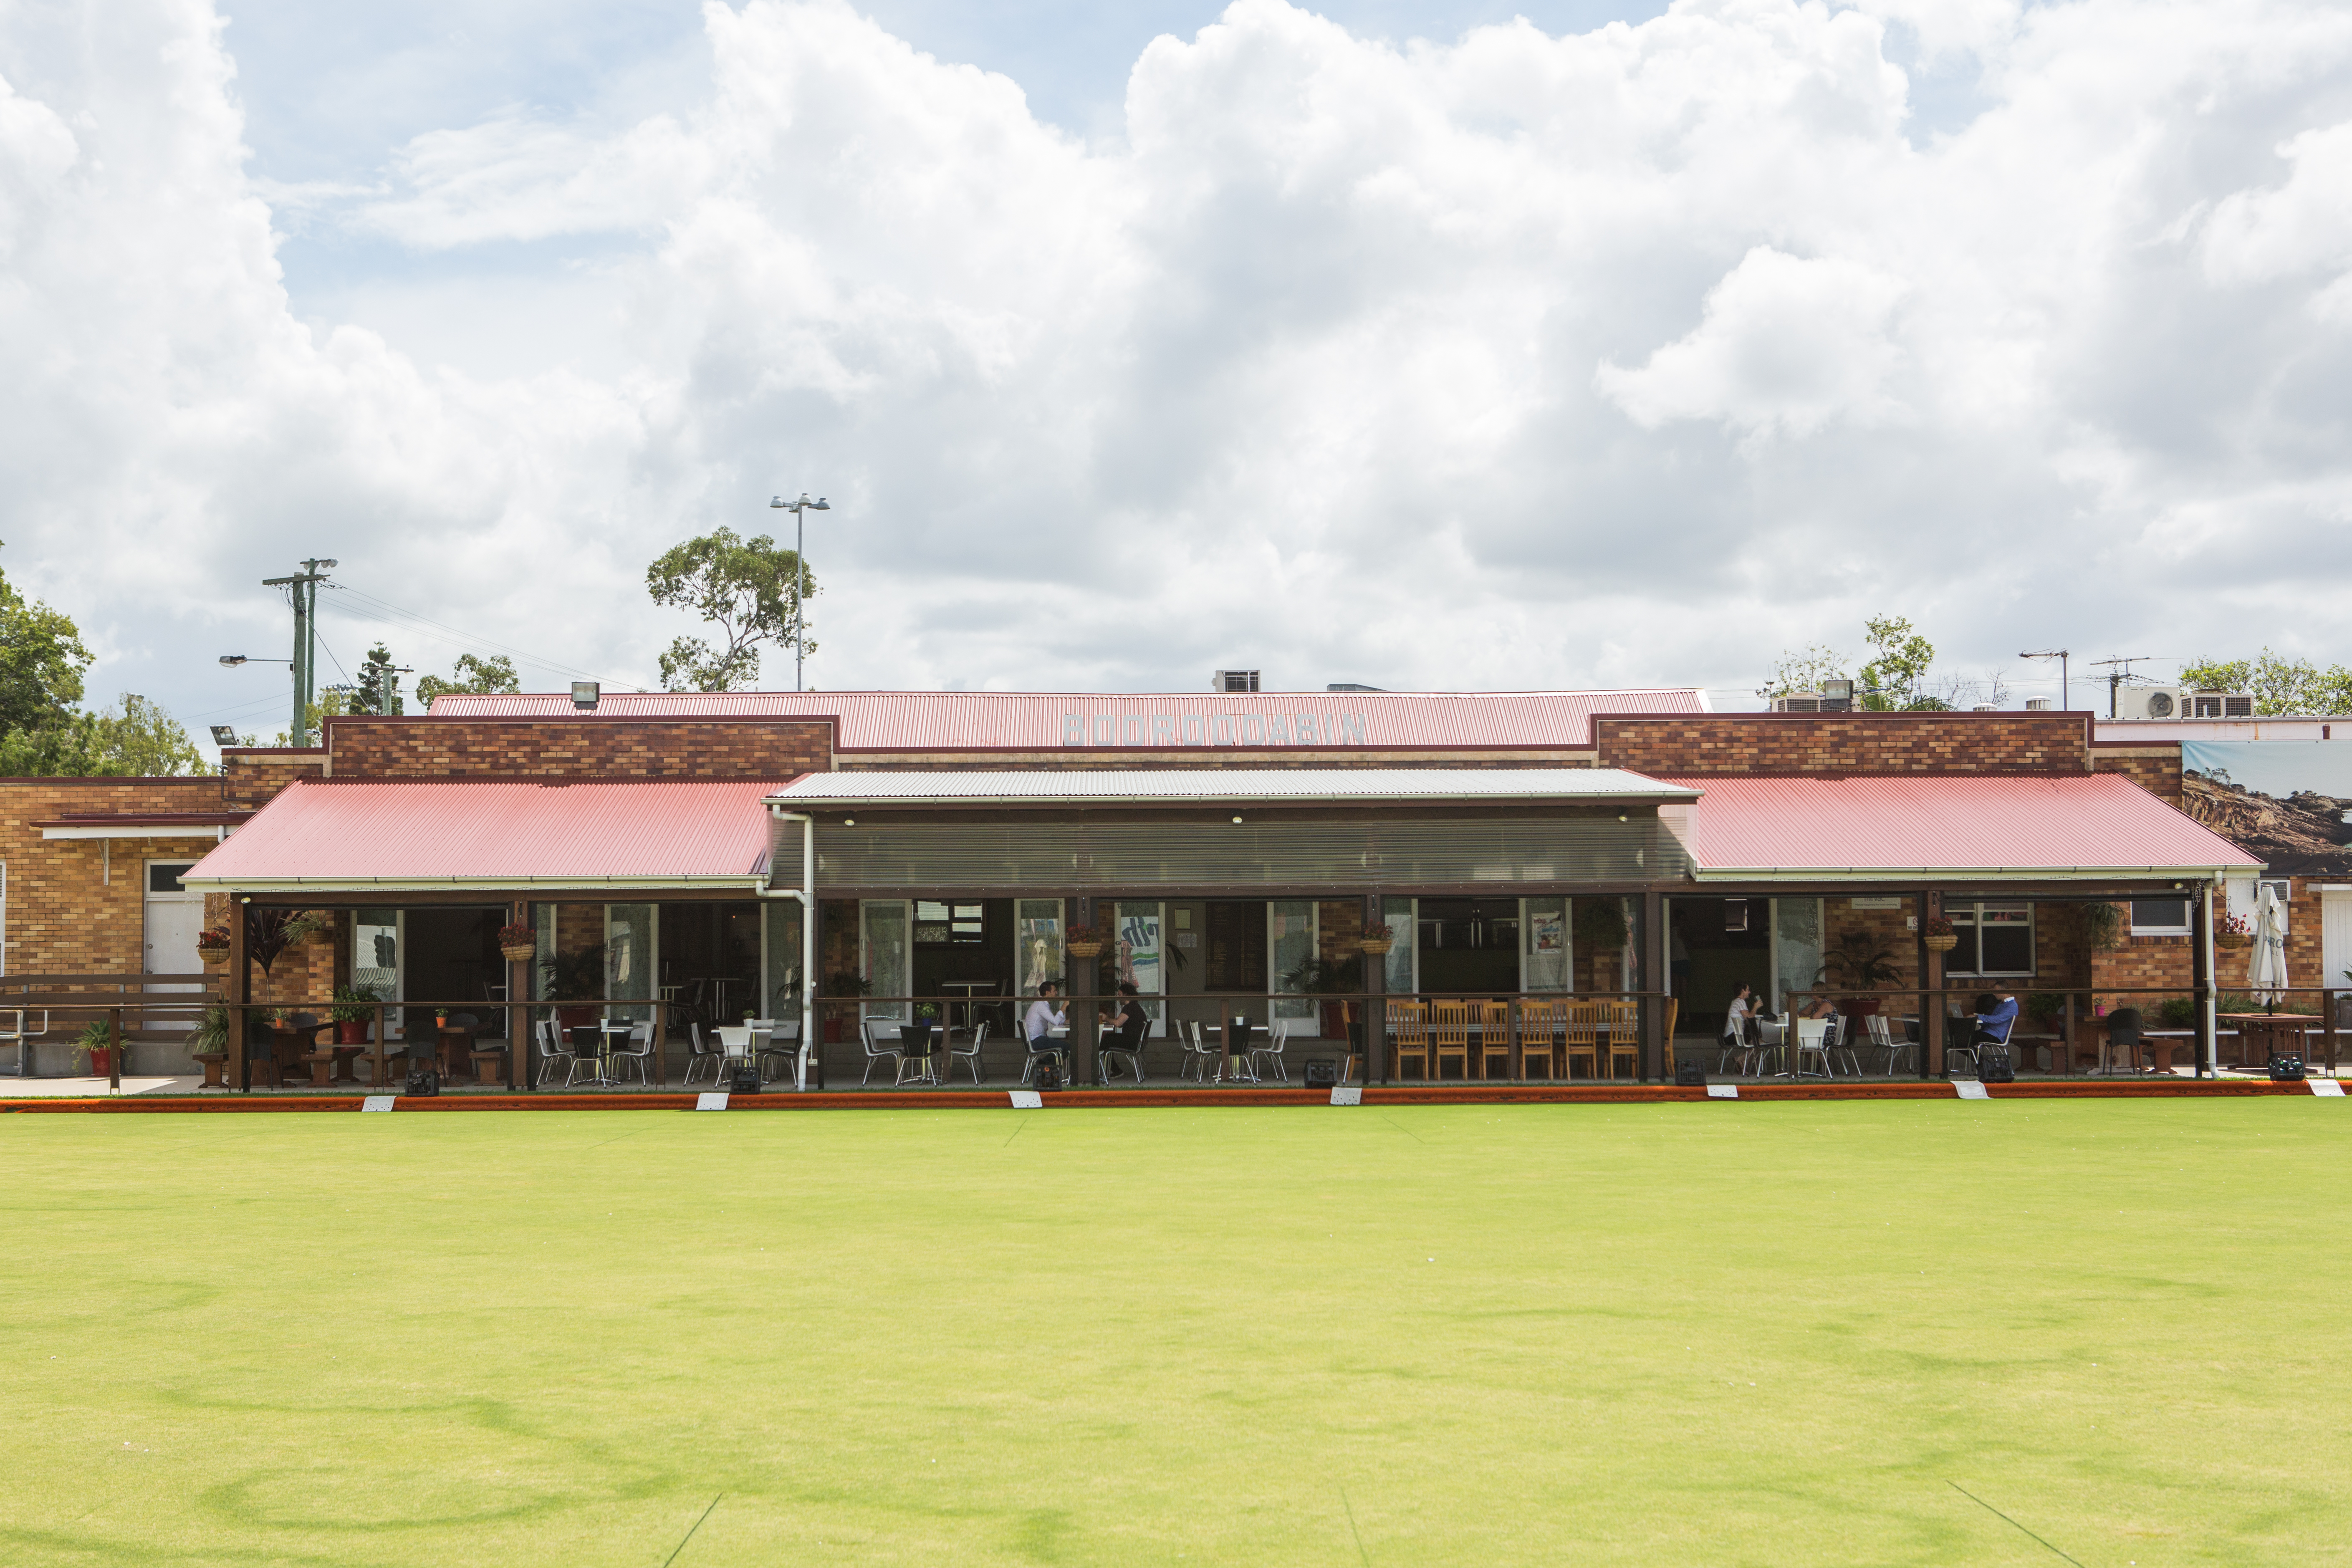 This is an image of the local heritage place known as Booroodabin Bowls Club